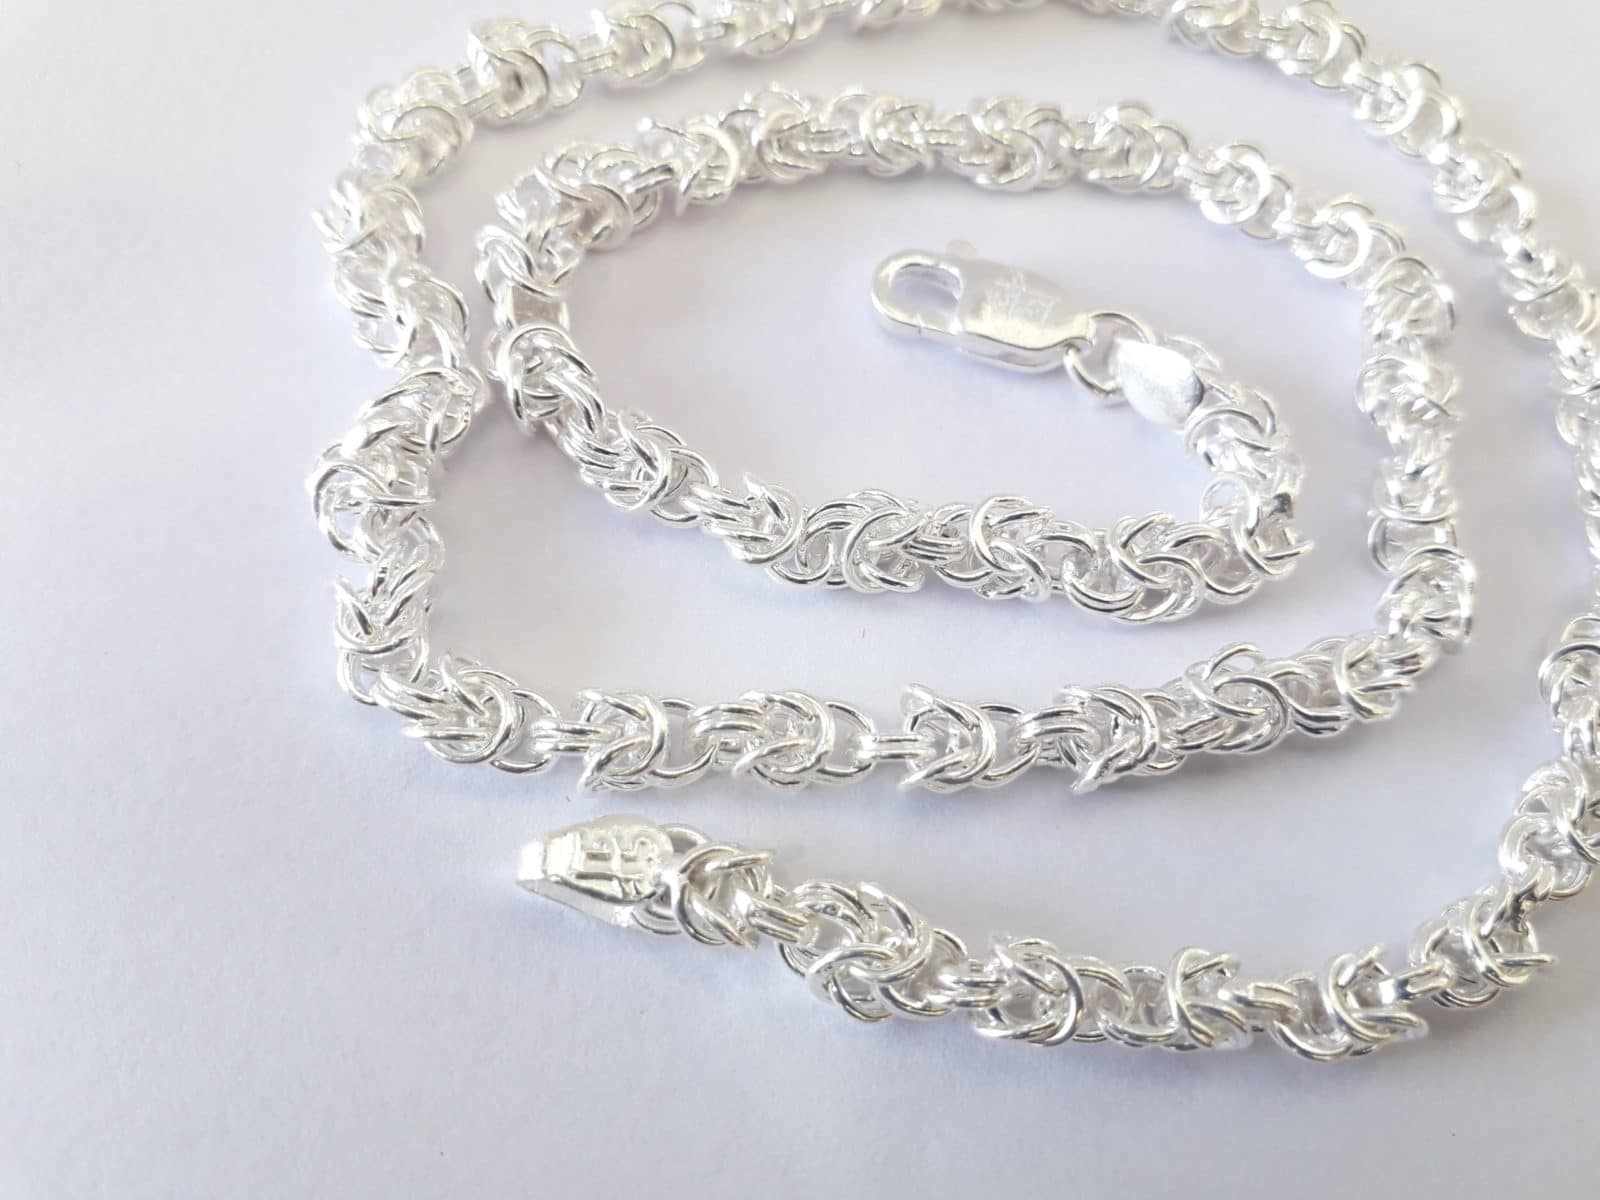 5 Stylish Silver Chains for Men That Will Elevate Your Look